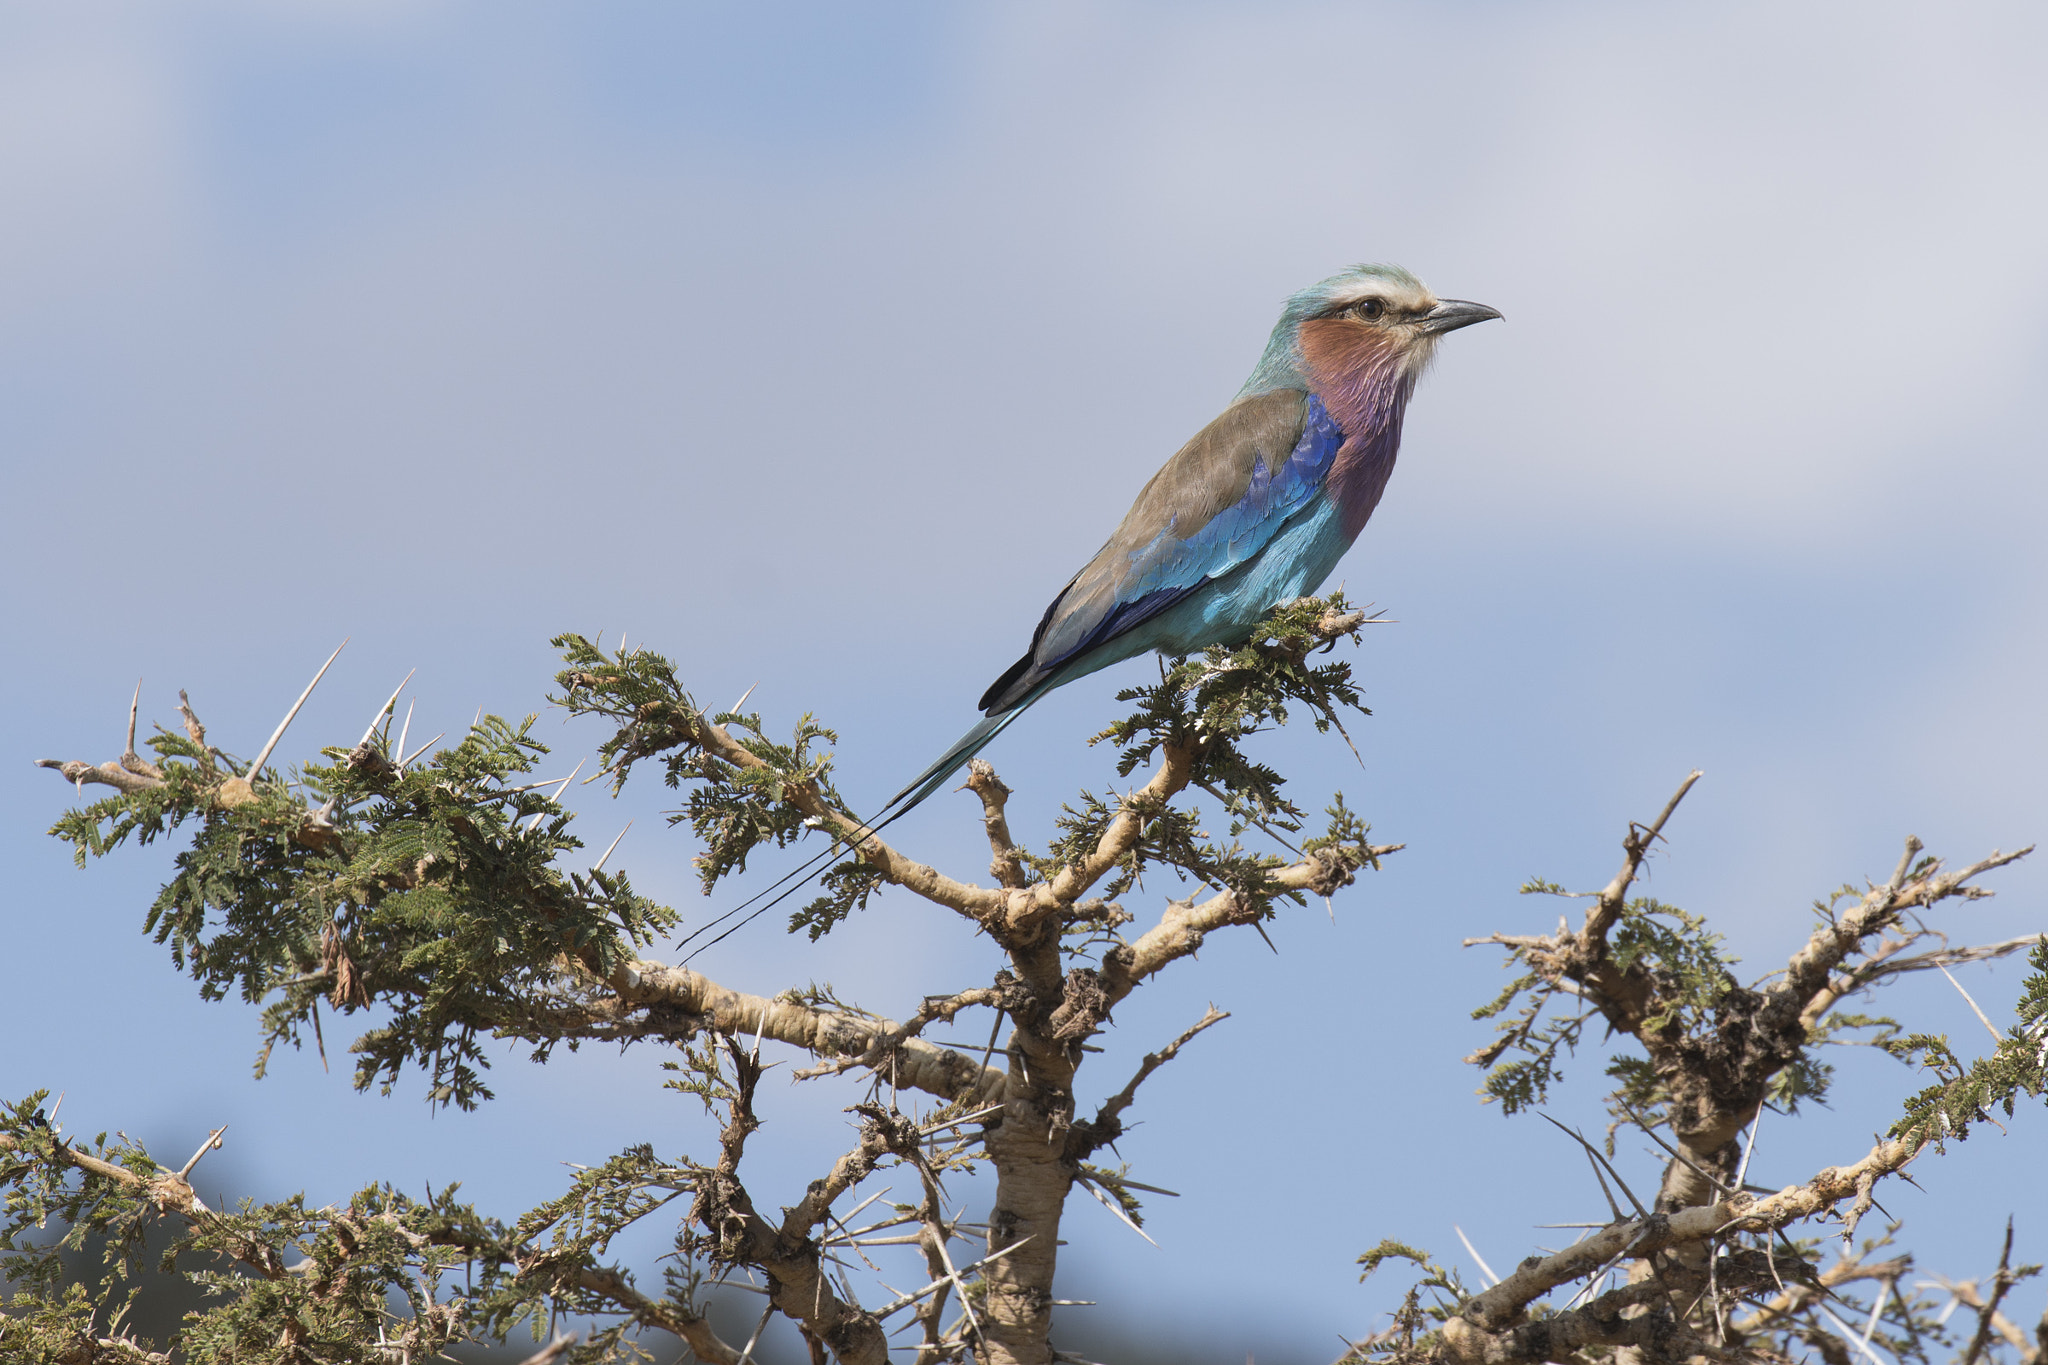 Sony a6300 sample photo. Lilac breasted roller photography